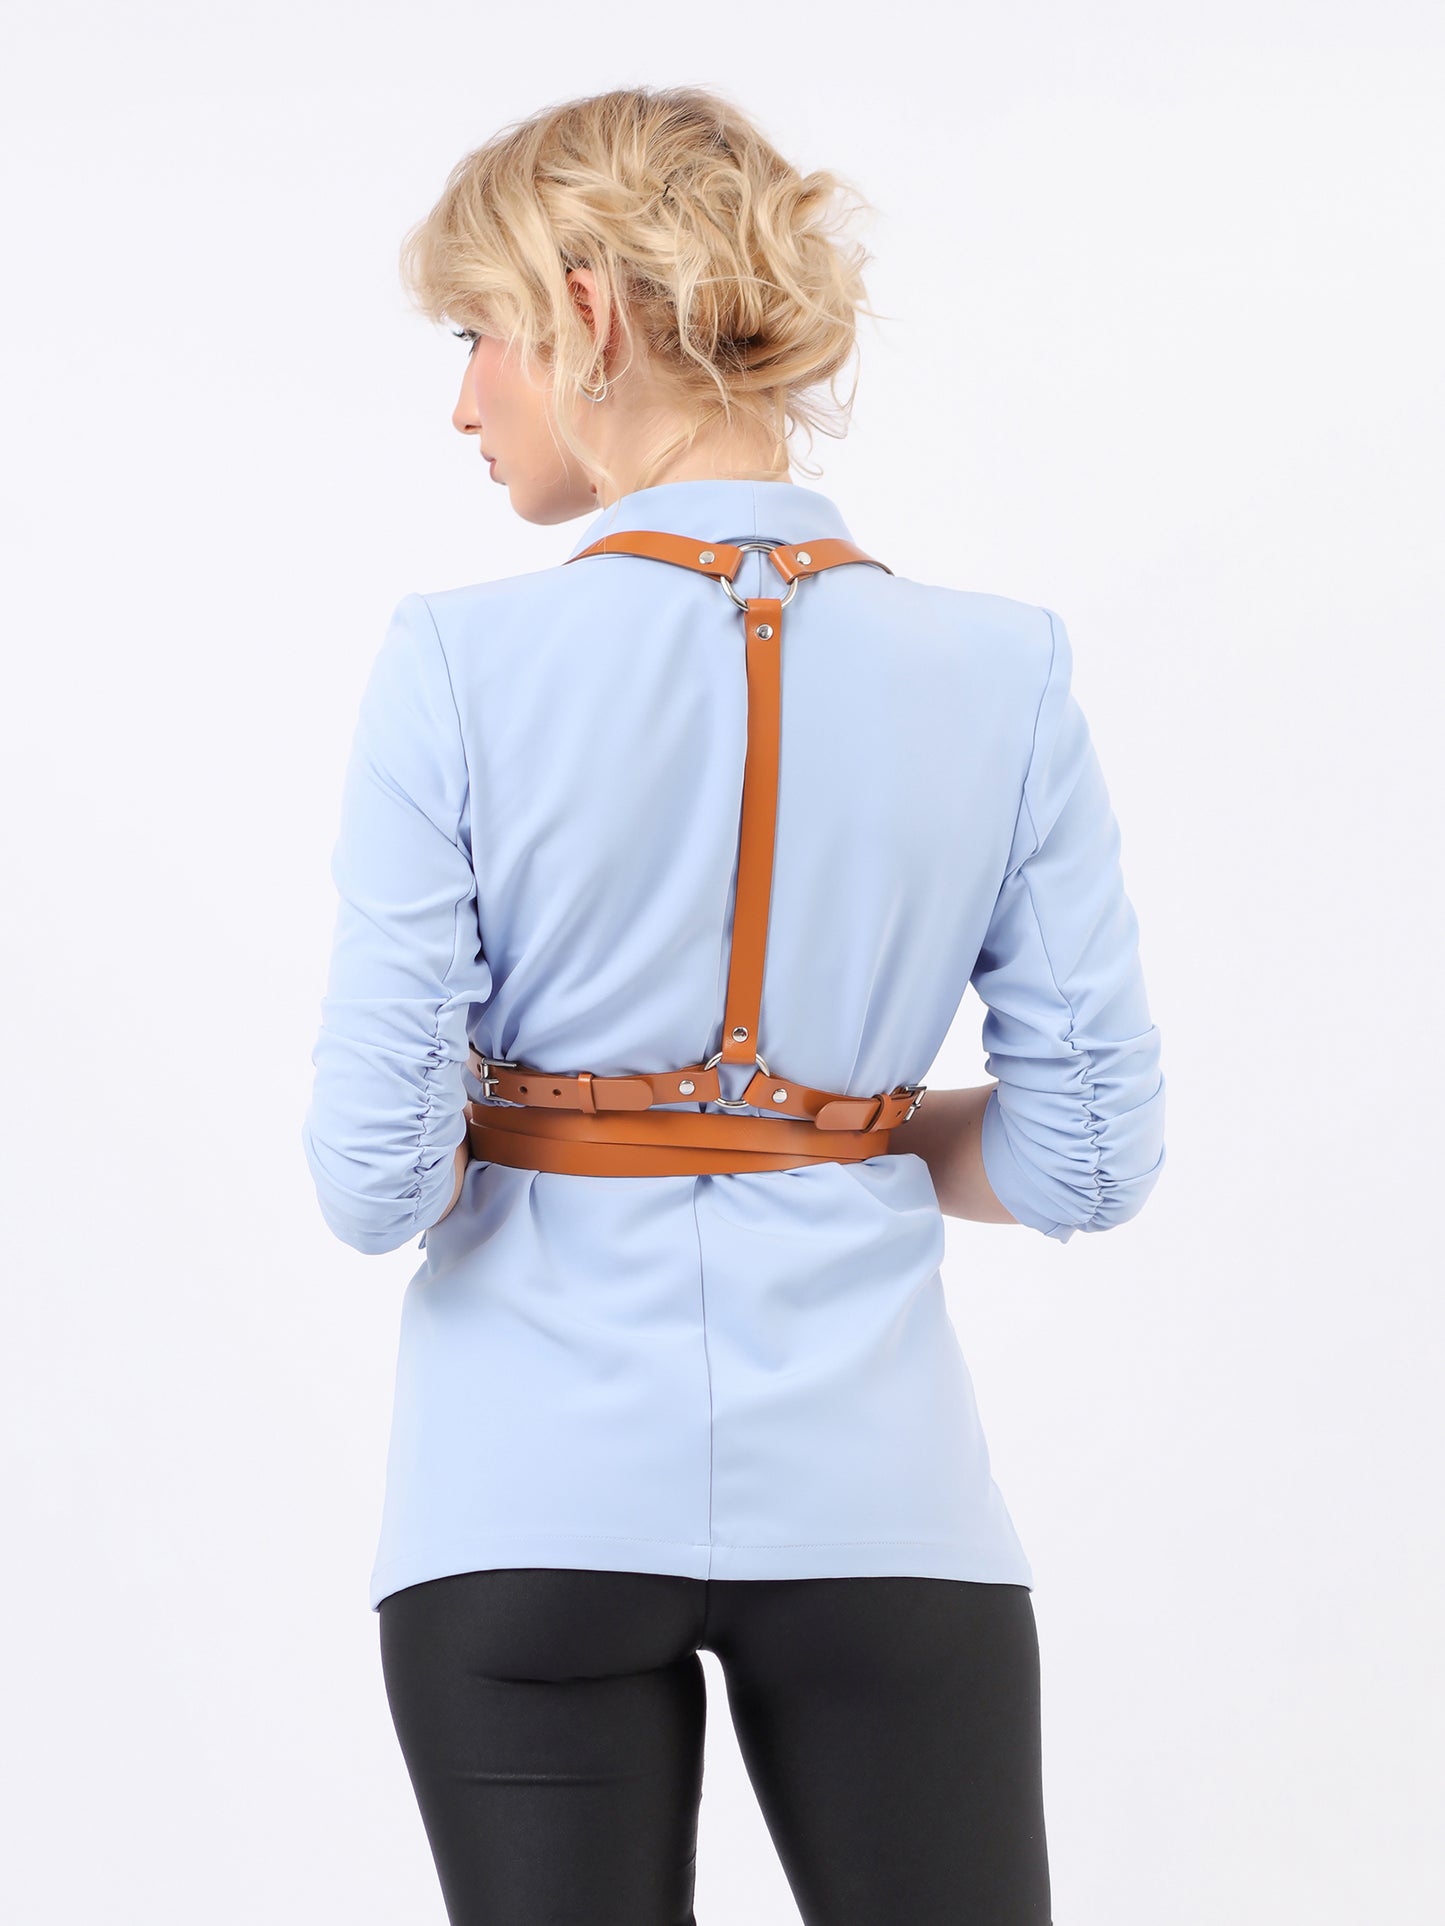 Back view of double belt harness fitted on woman wearing blue blazer.